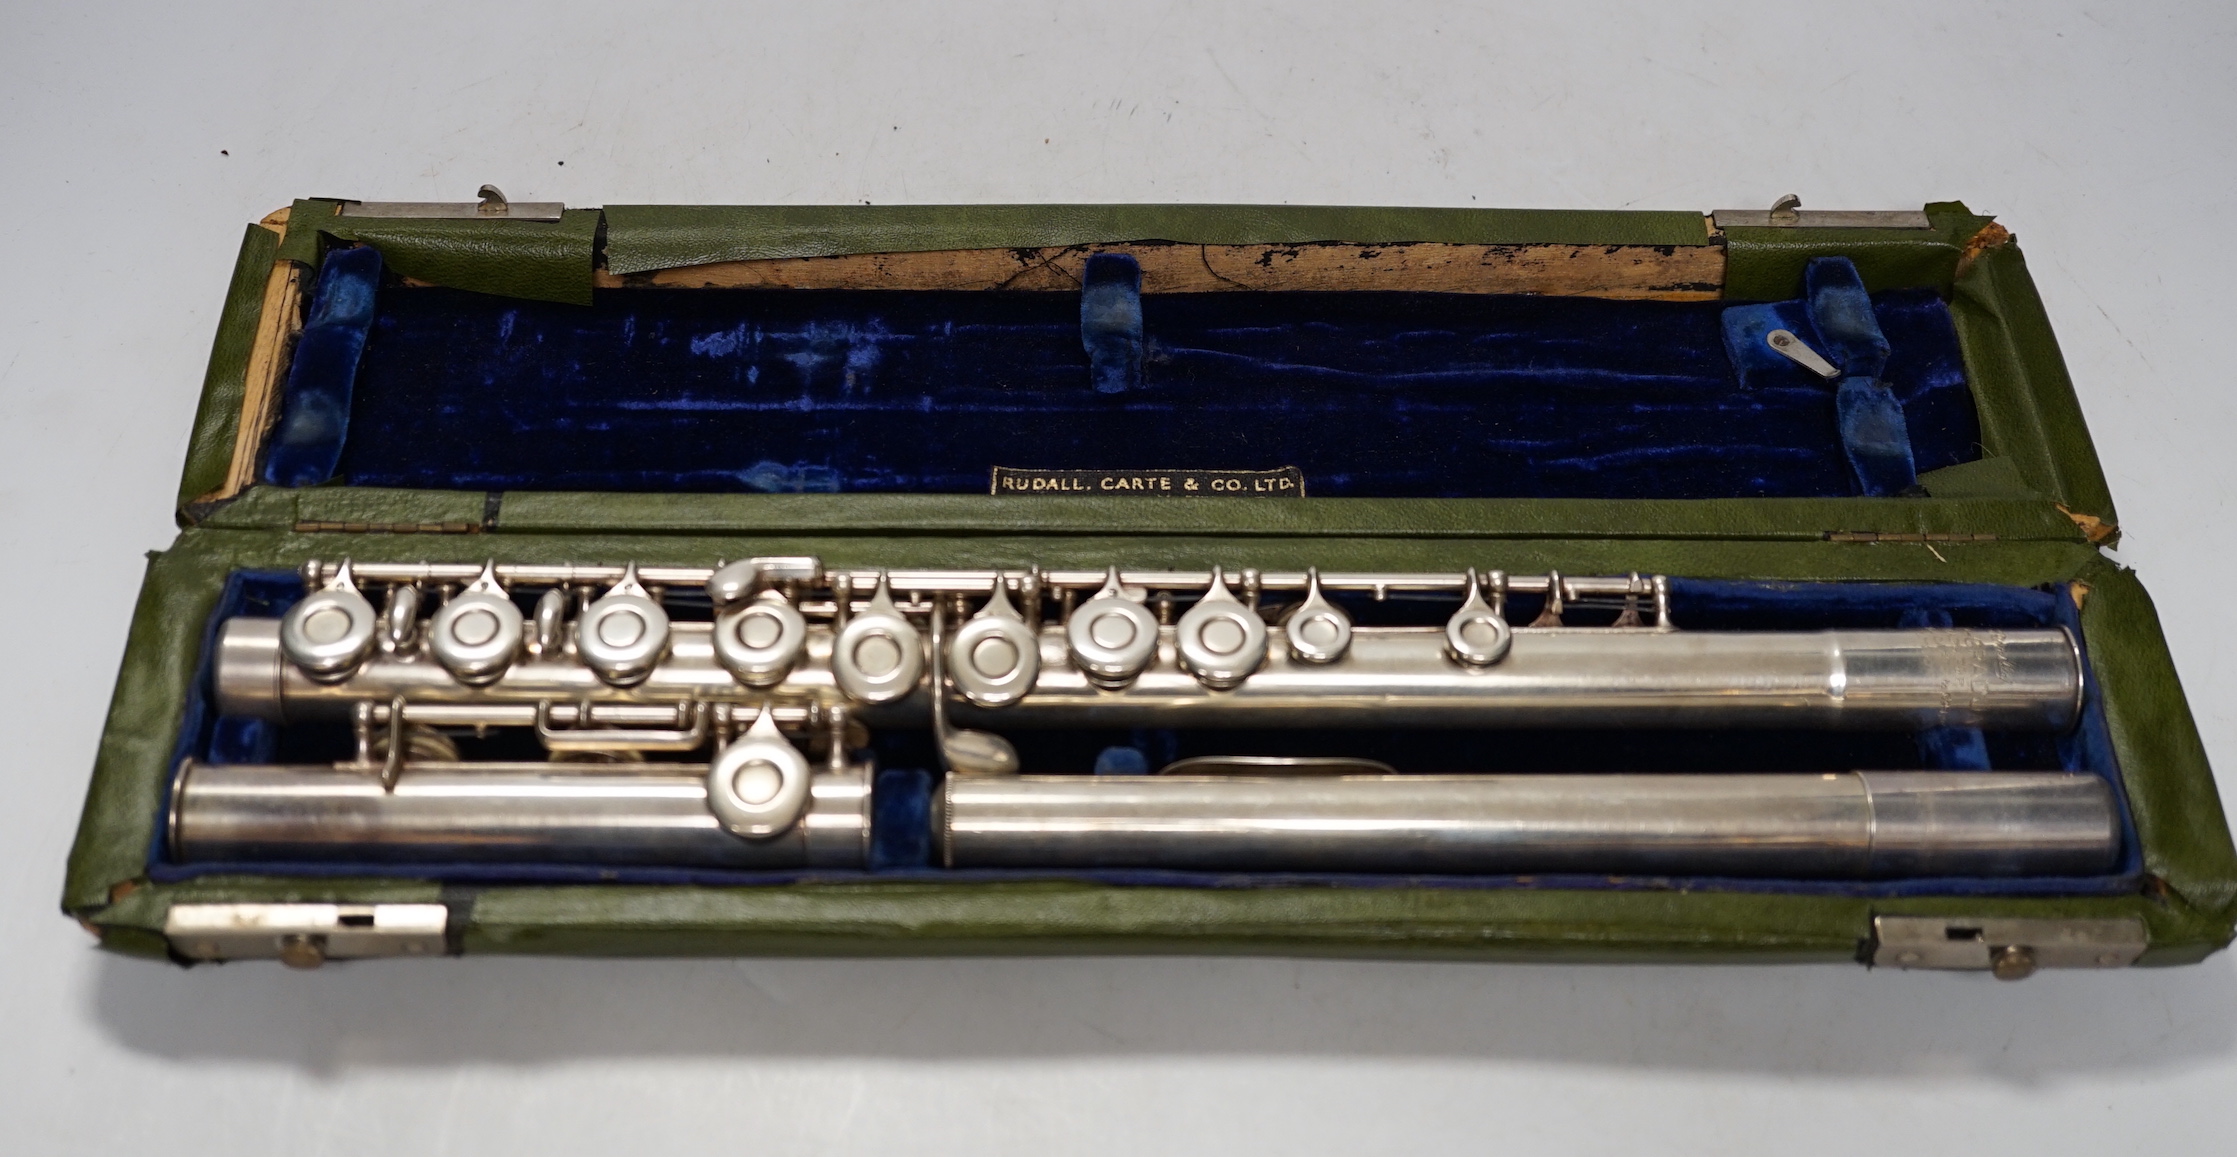 A cased Rudall, Carte & Co. flute, with closed hole key work and sterling silver head joint